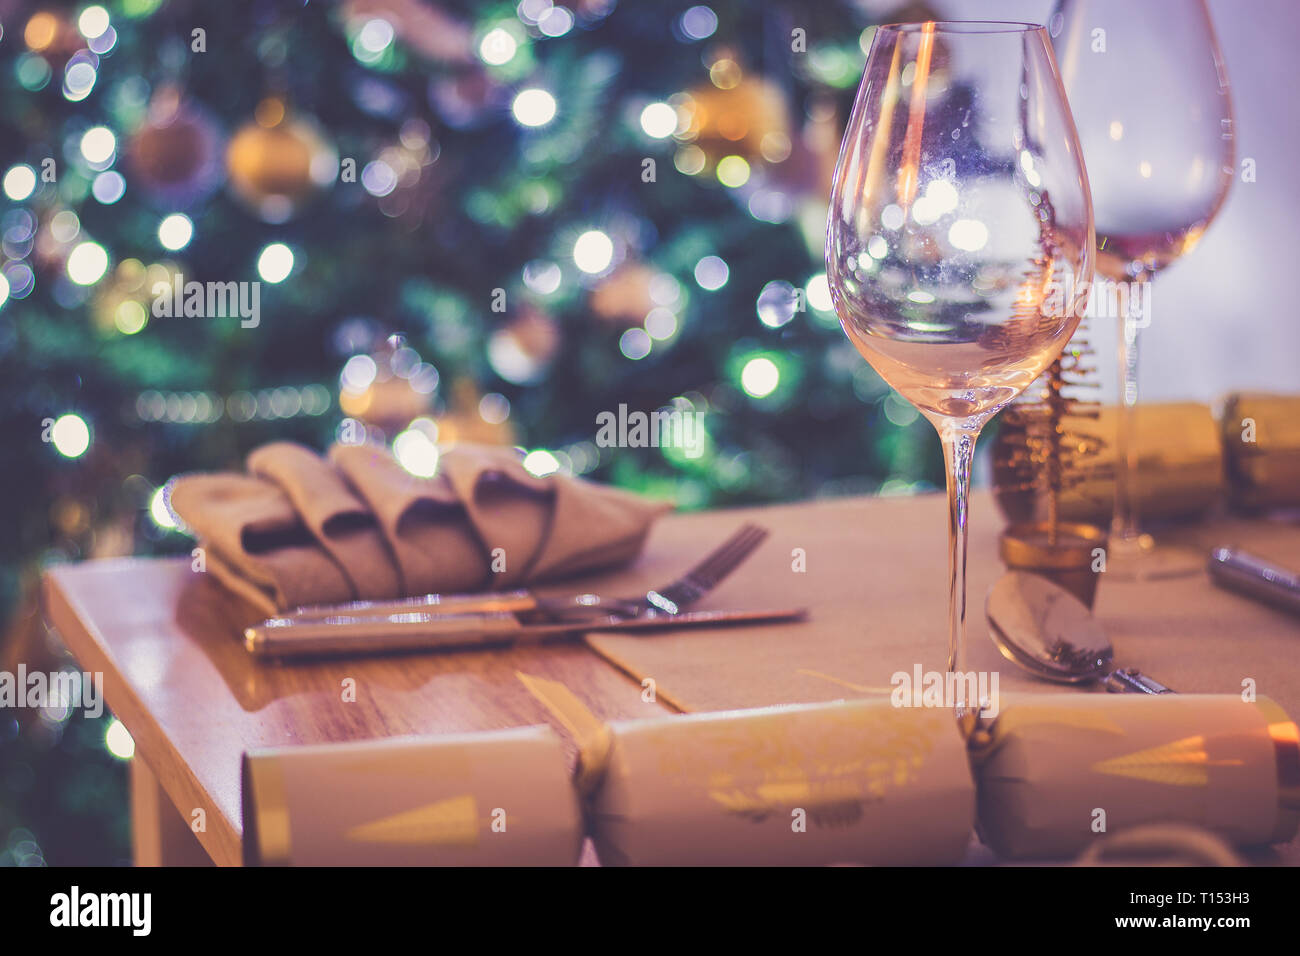 A dining table set for a Christmas meal, with defocussed tree light in the background Stock Photo